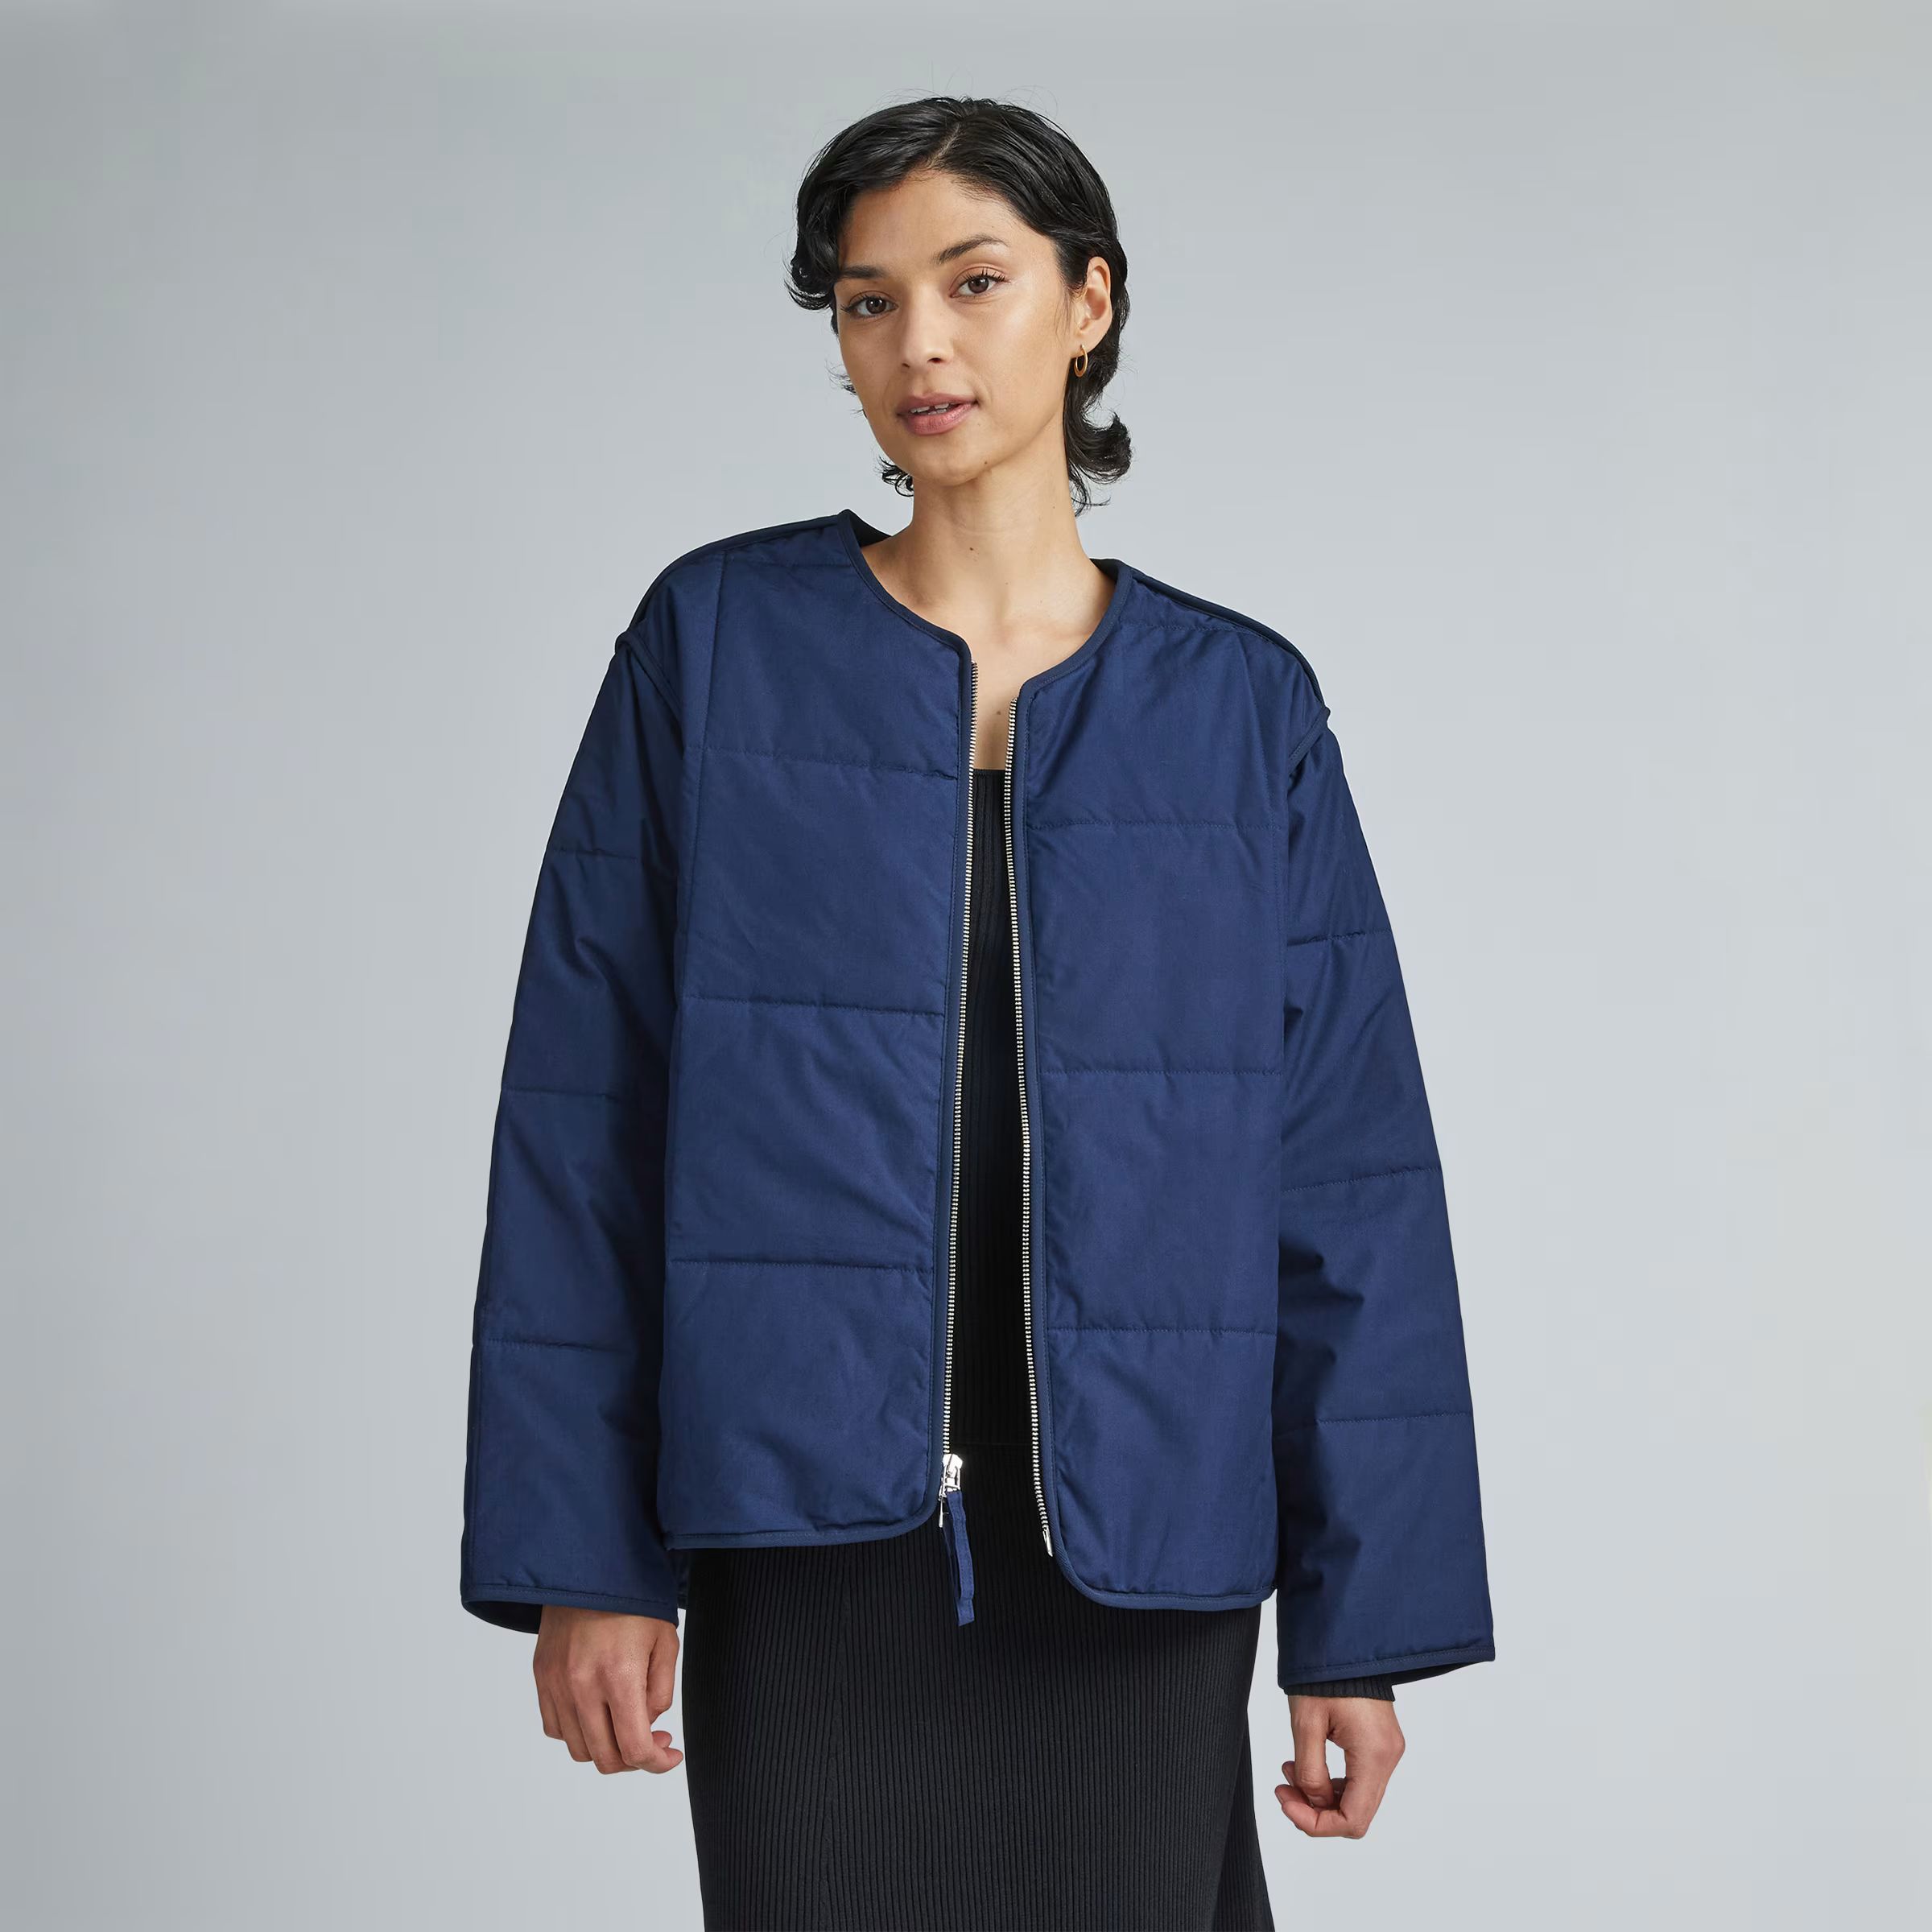 The Quilted Cotton Liner | Everlane